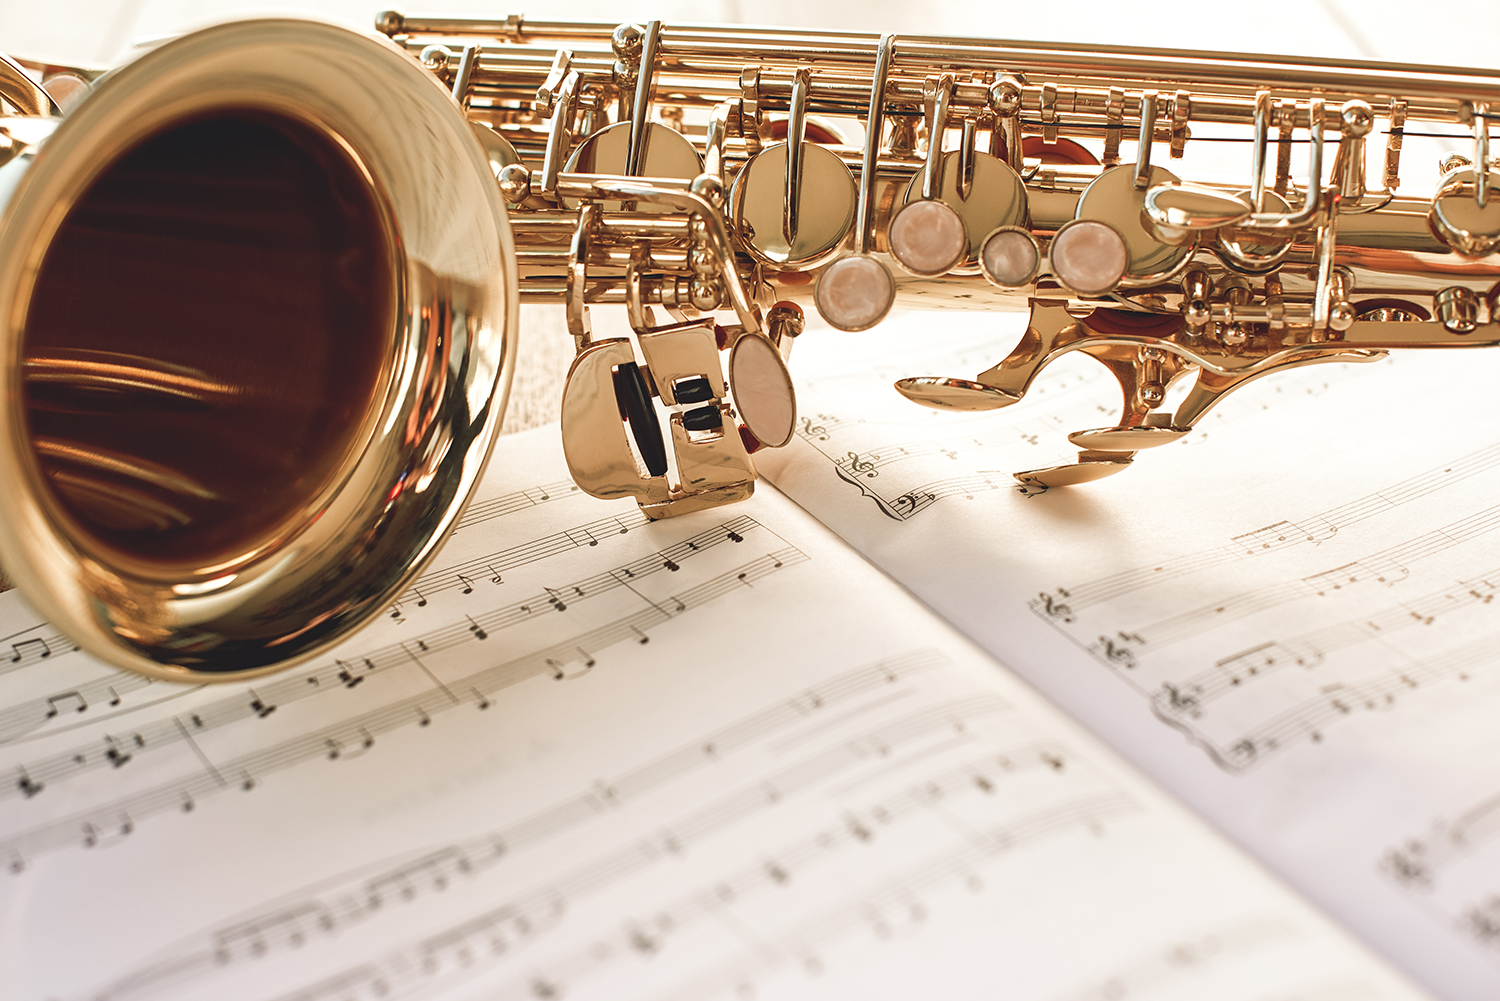 Closeup of a beautiful and shiny golden saxophone lying on music notes. Musical instruments. Music equipment.